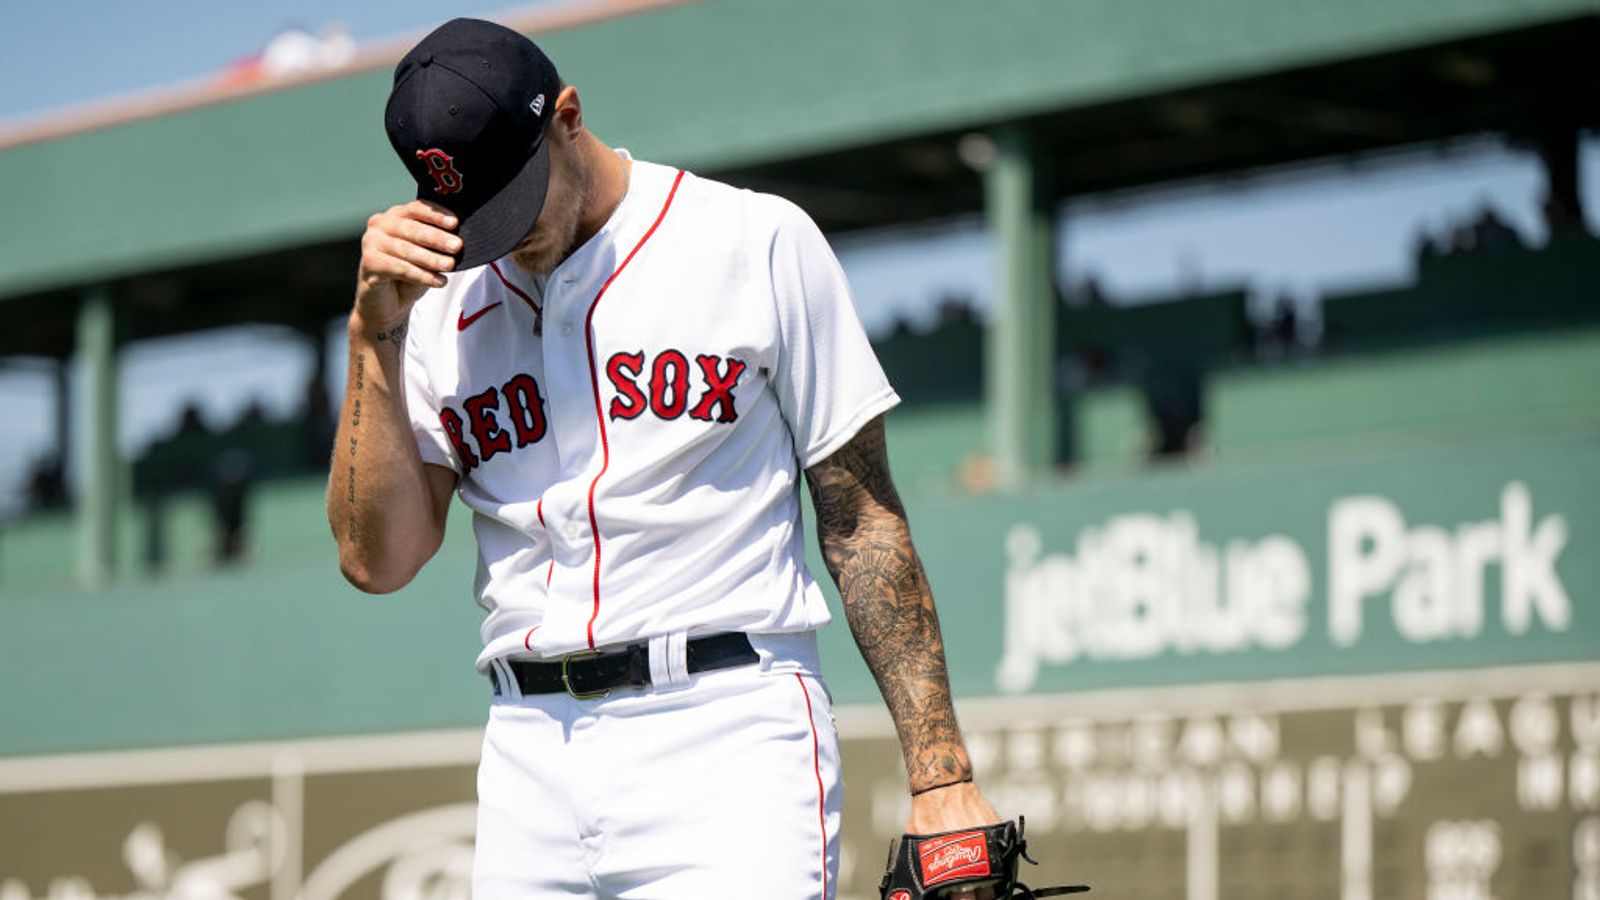 John Schreiber is emerging as a trusted option in the Red Sox bullpen